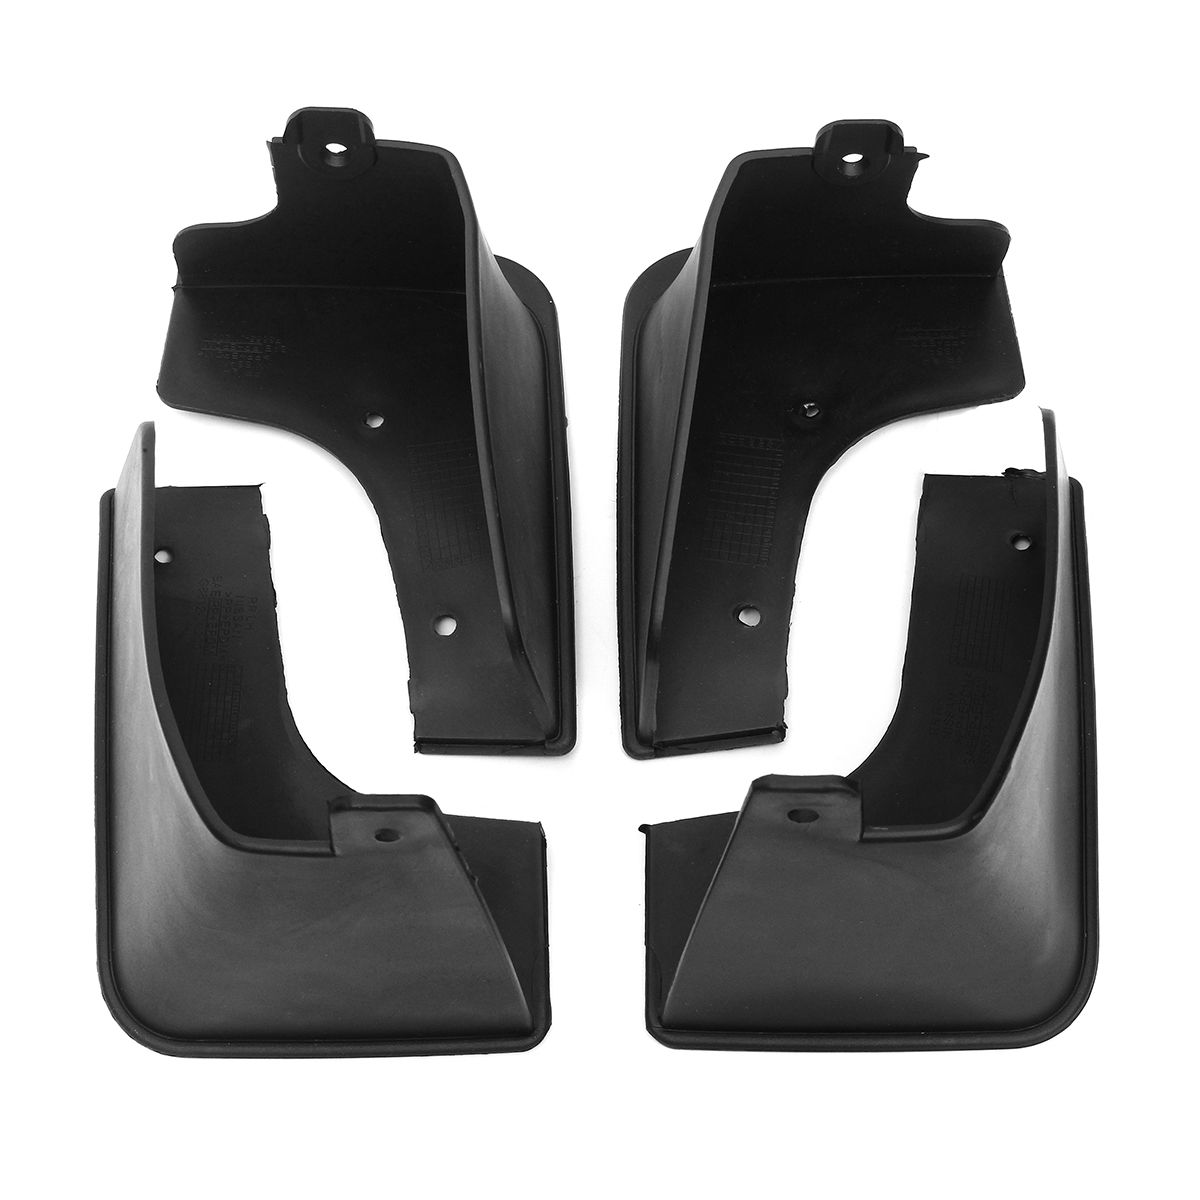 Front-And-Rear-Mud-flaps-Car-Mudguards-For-Nissan-Teana-J32-2009-2013-1389050